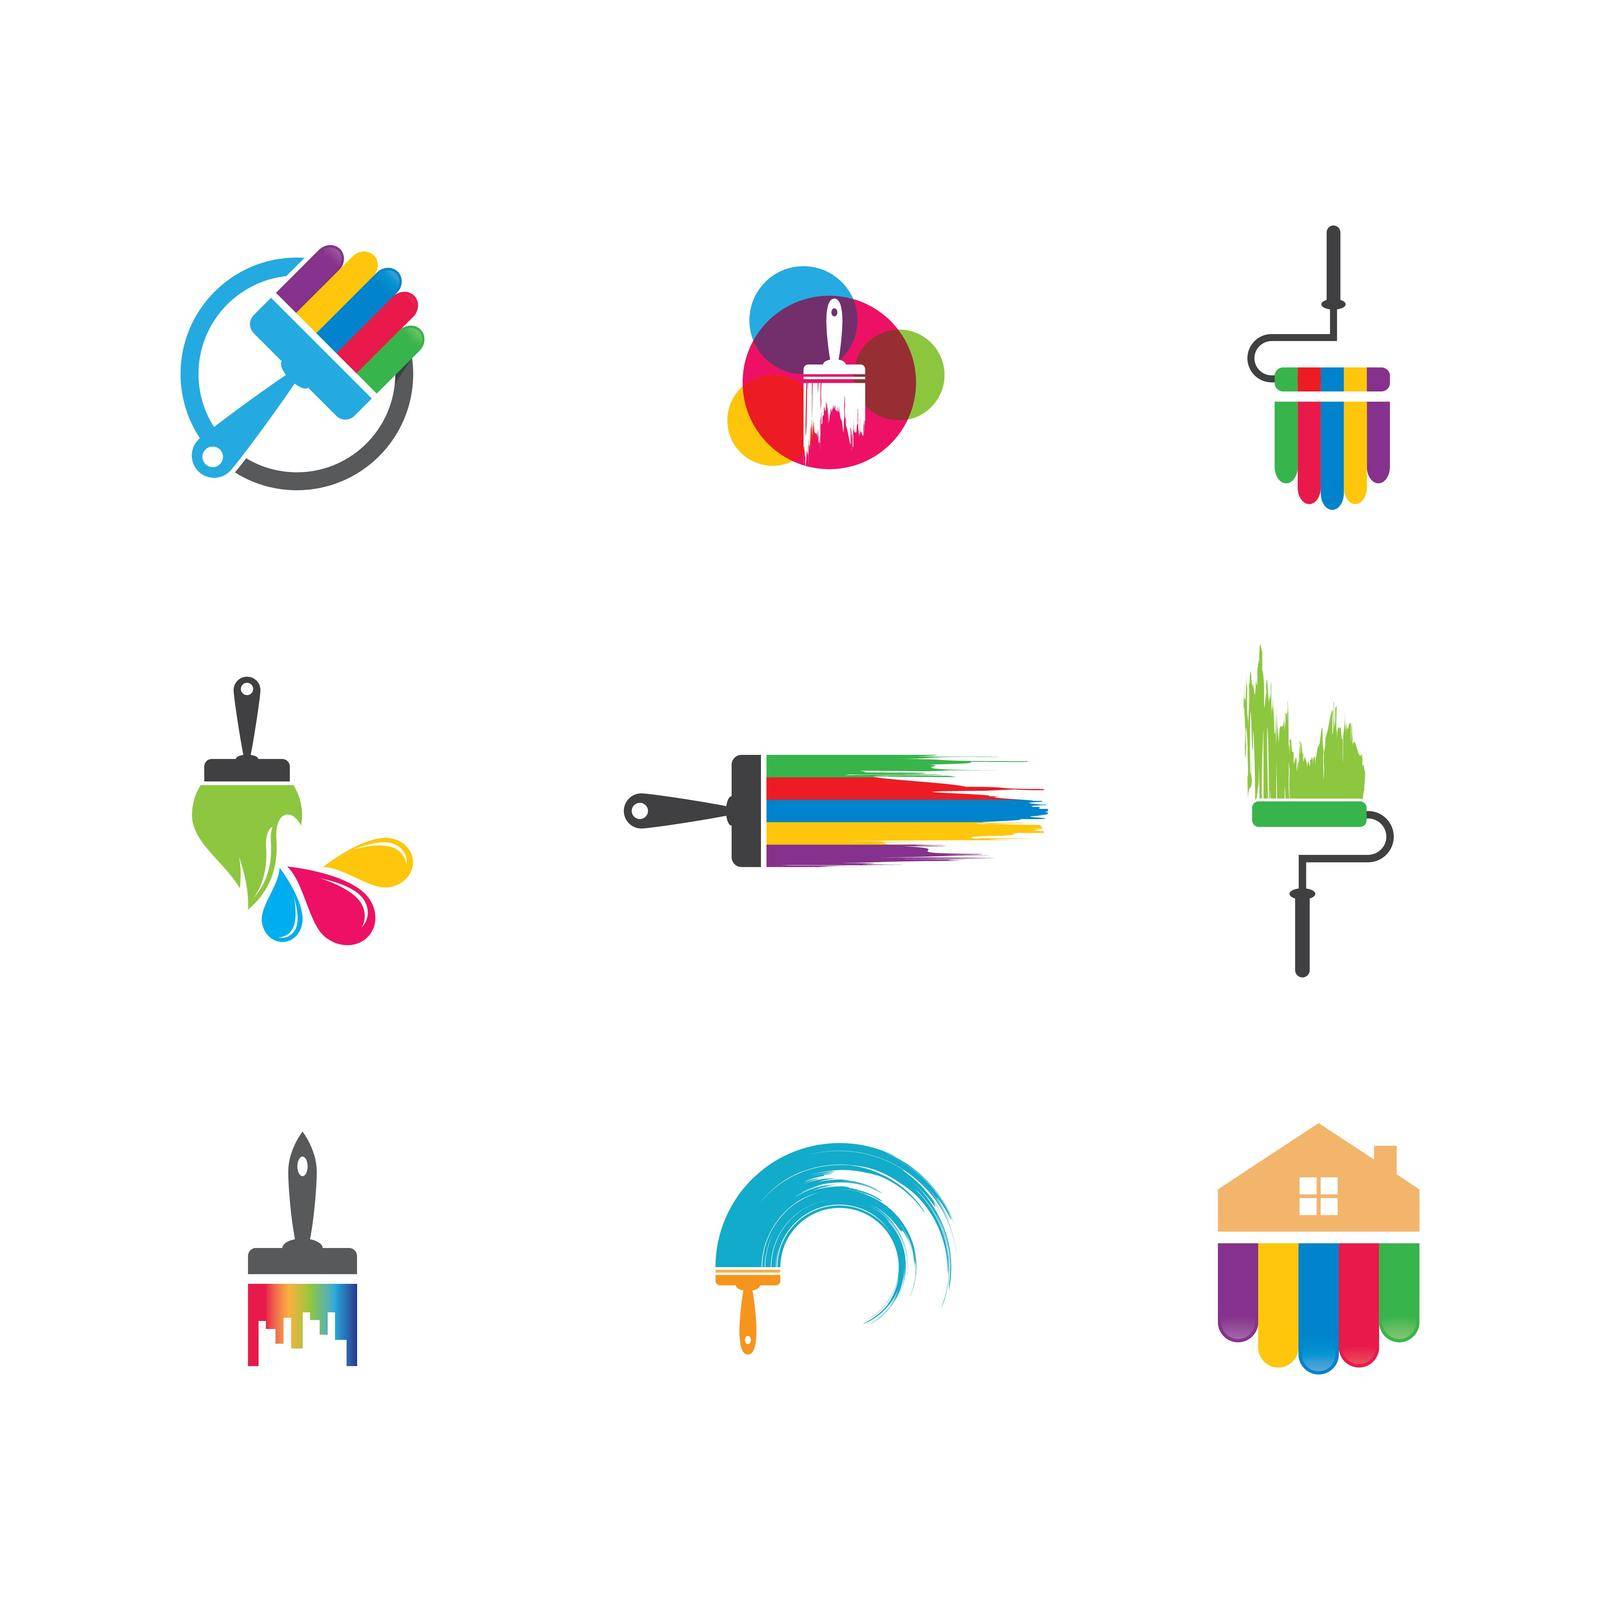 Paintbrush vector icon by Fat17